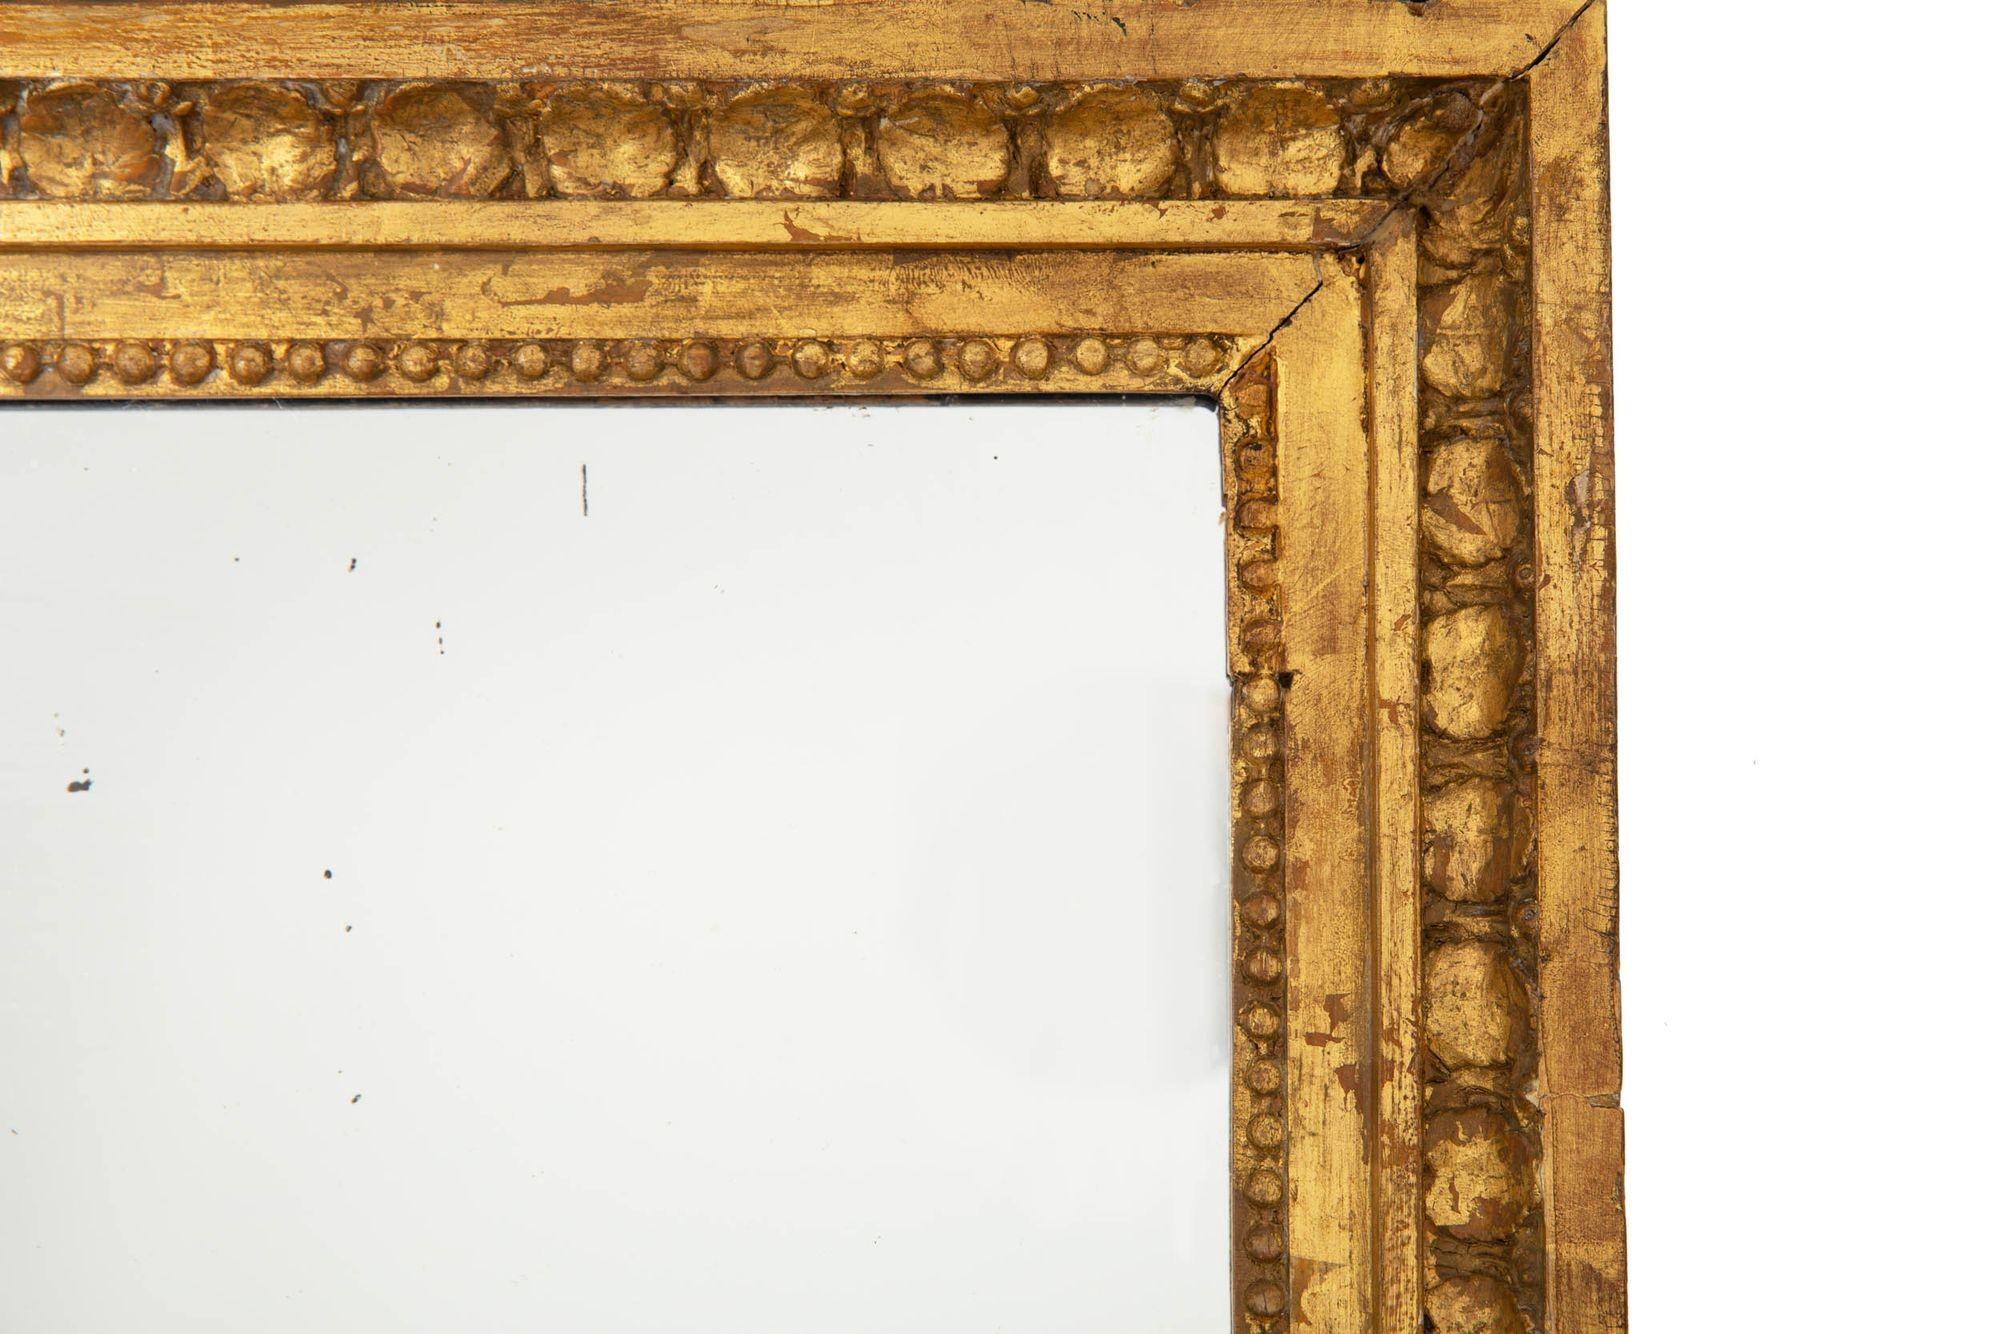 Regency Period Gilded Pier Mirror with Lion’s Mask, early 19th century For Sale 9